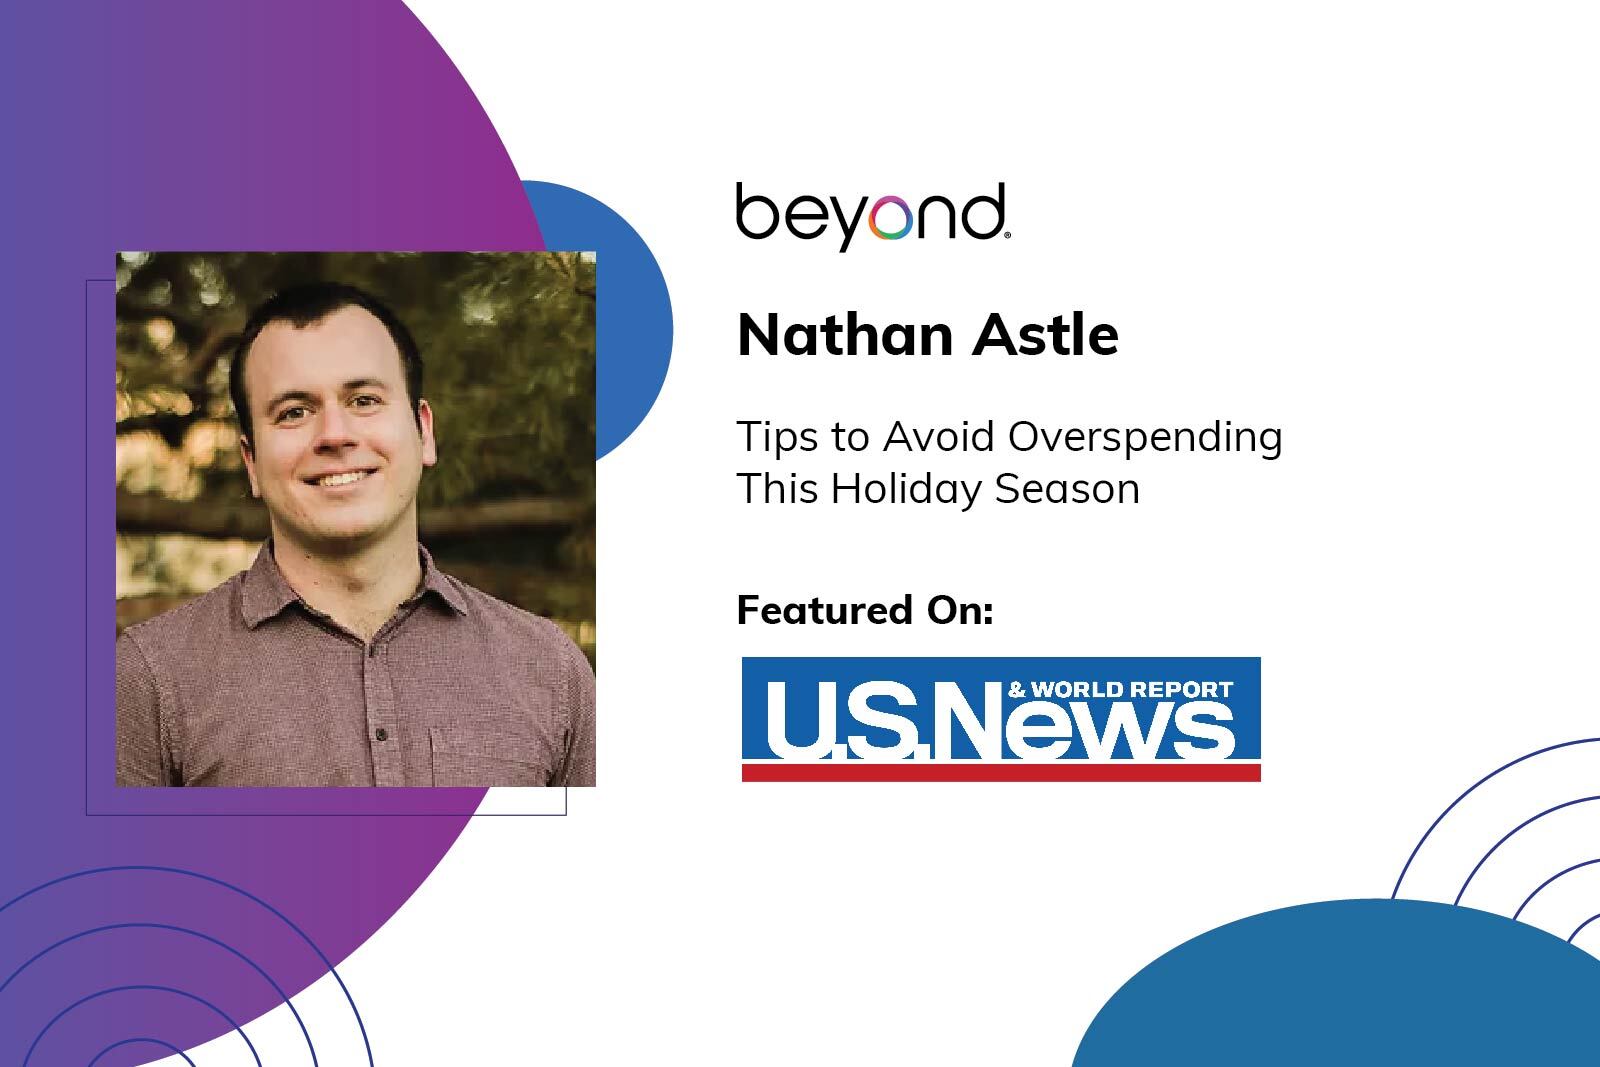 U.S. News & World Report includes advice from Beyond Finance and FTCI Nathan Astle, CFT-I